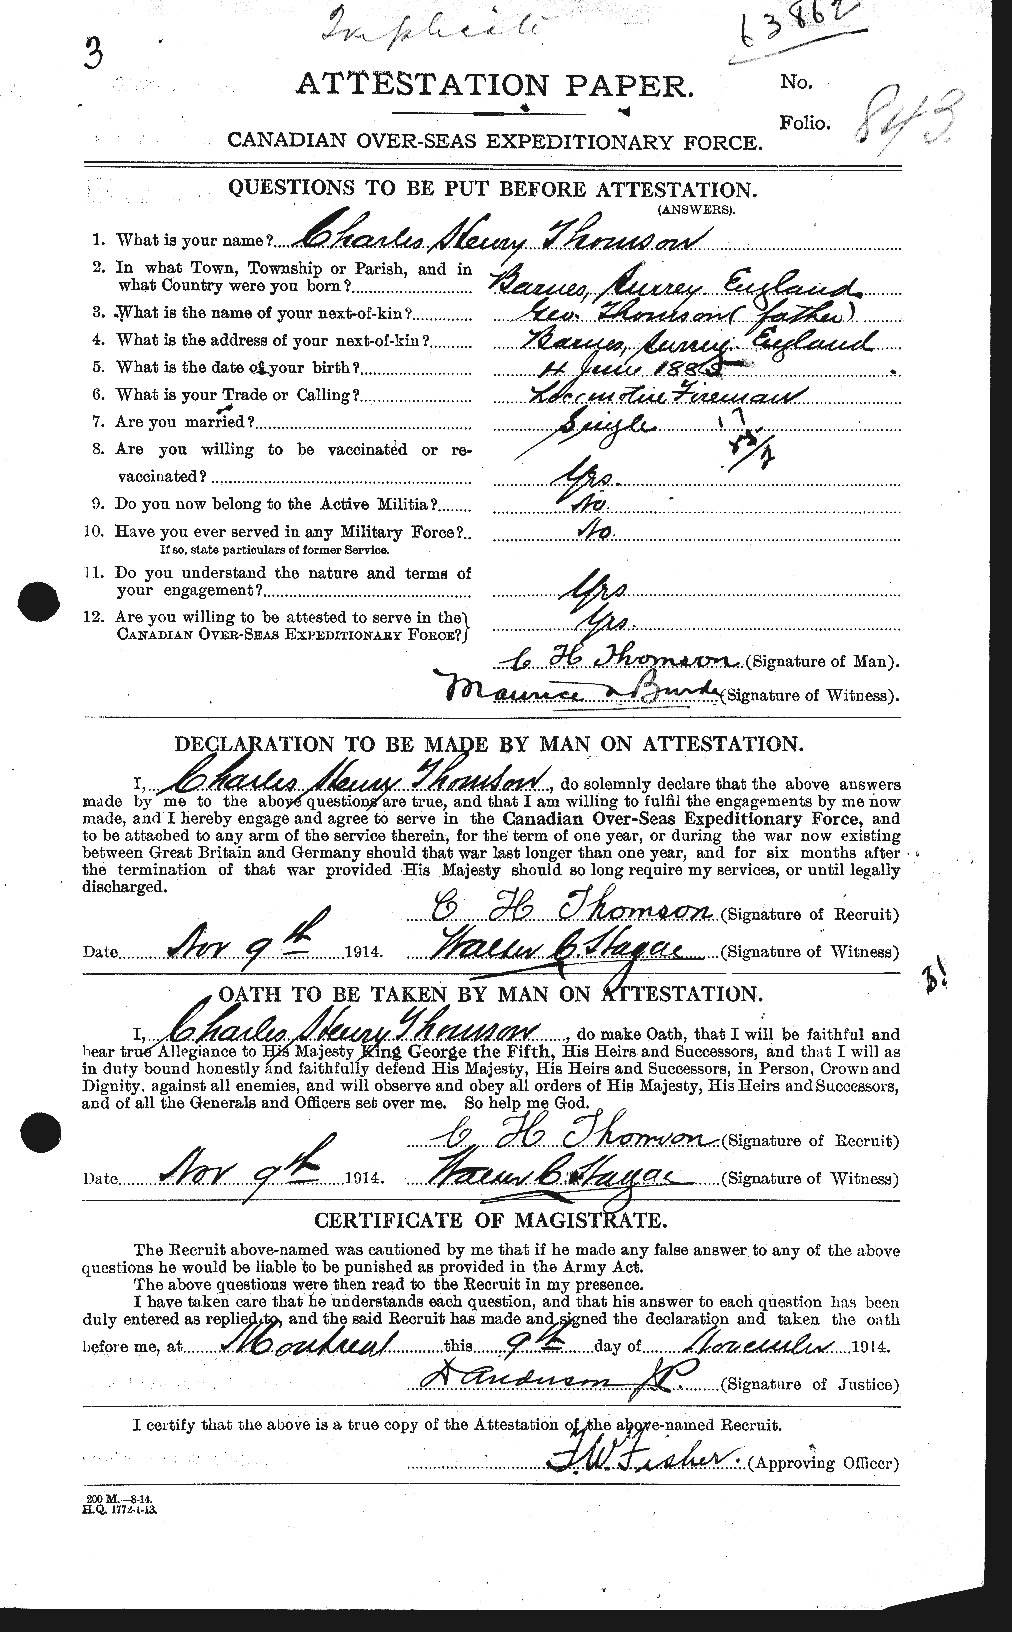 Personnel Records of the First World War - CEF 632303a